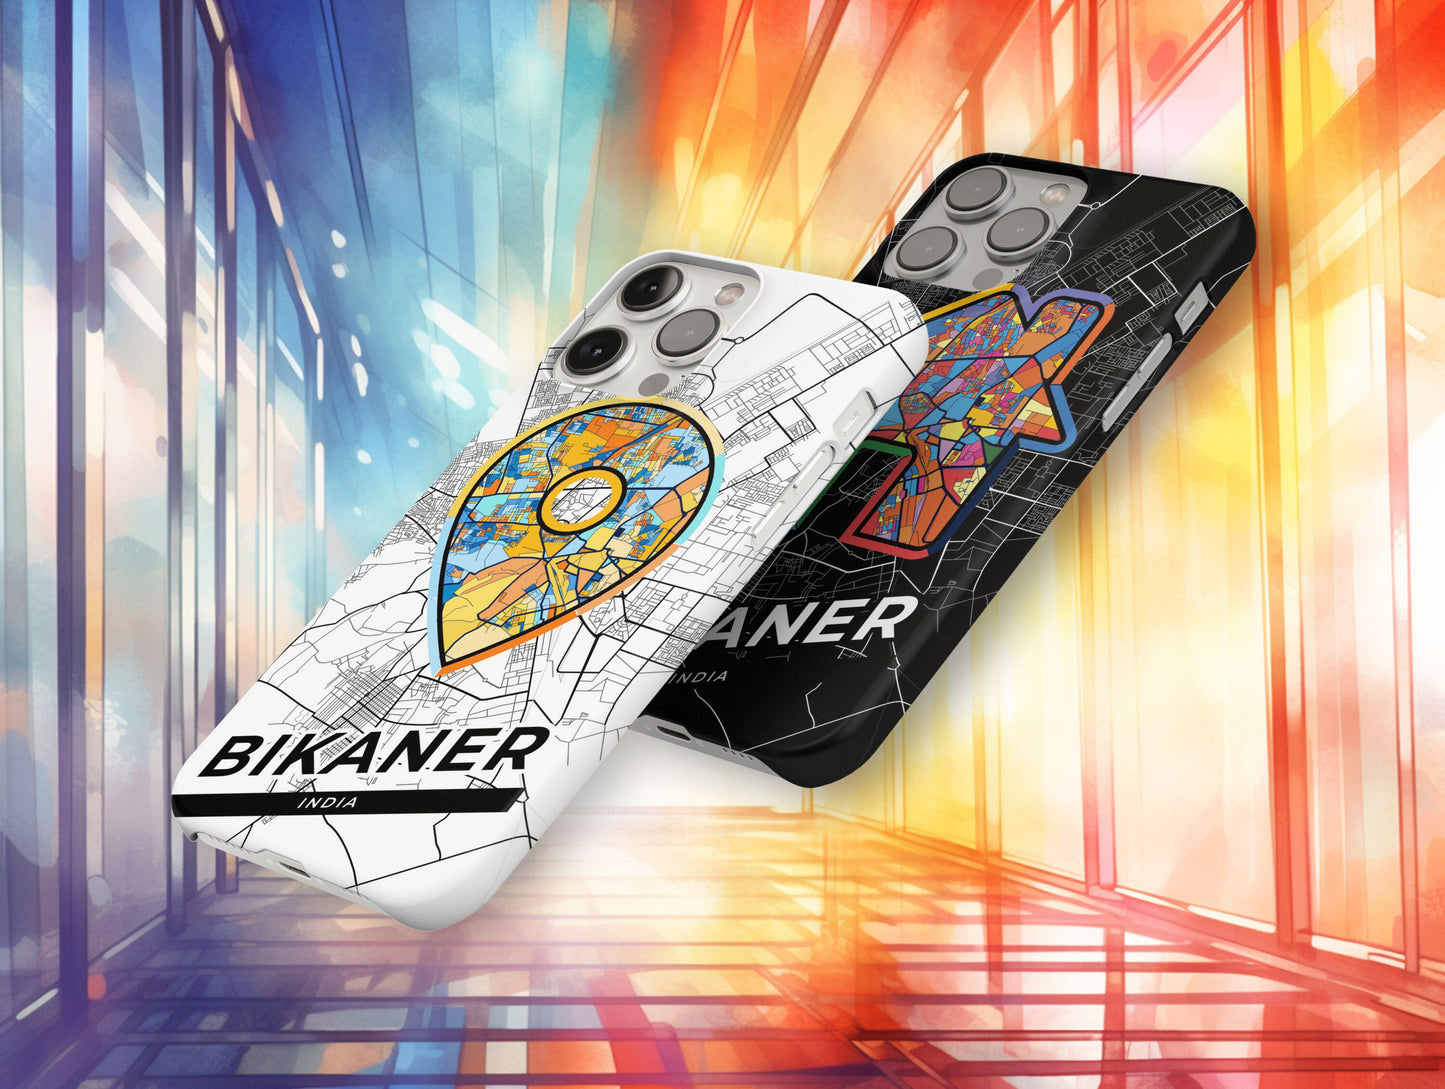 Bikaner India slim phone case with colorful icon. Birthday, wedding or housewarming gift. Couple match cases.